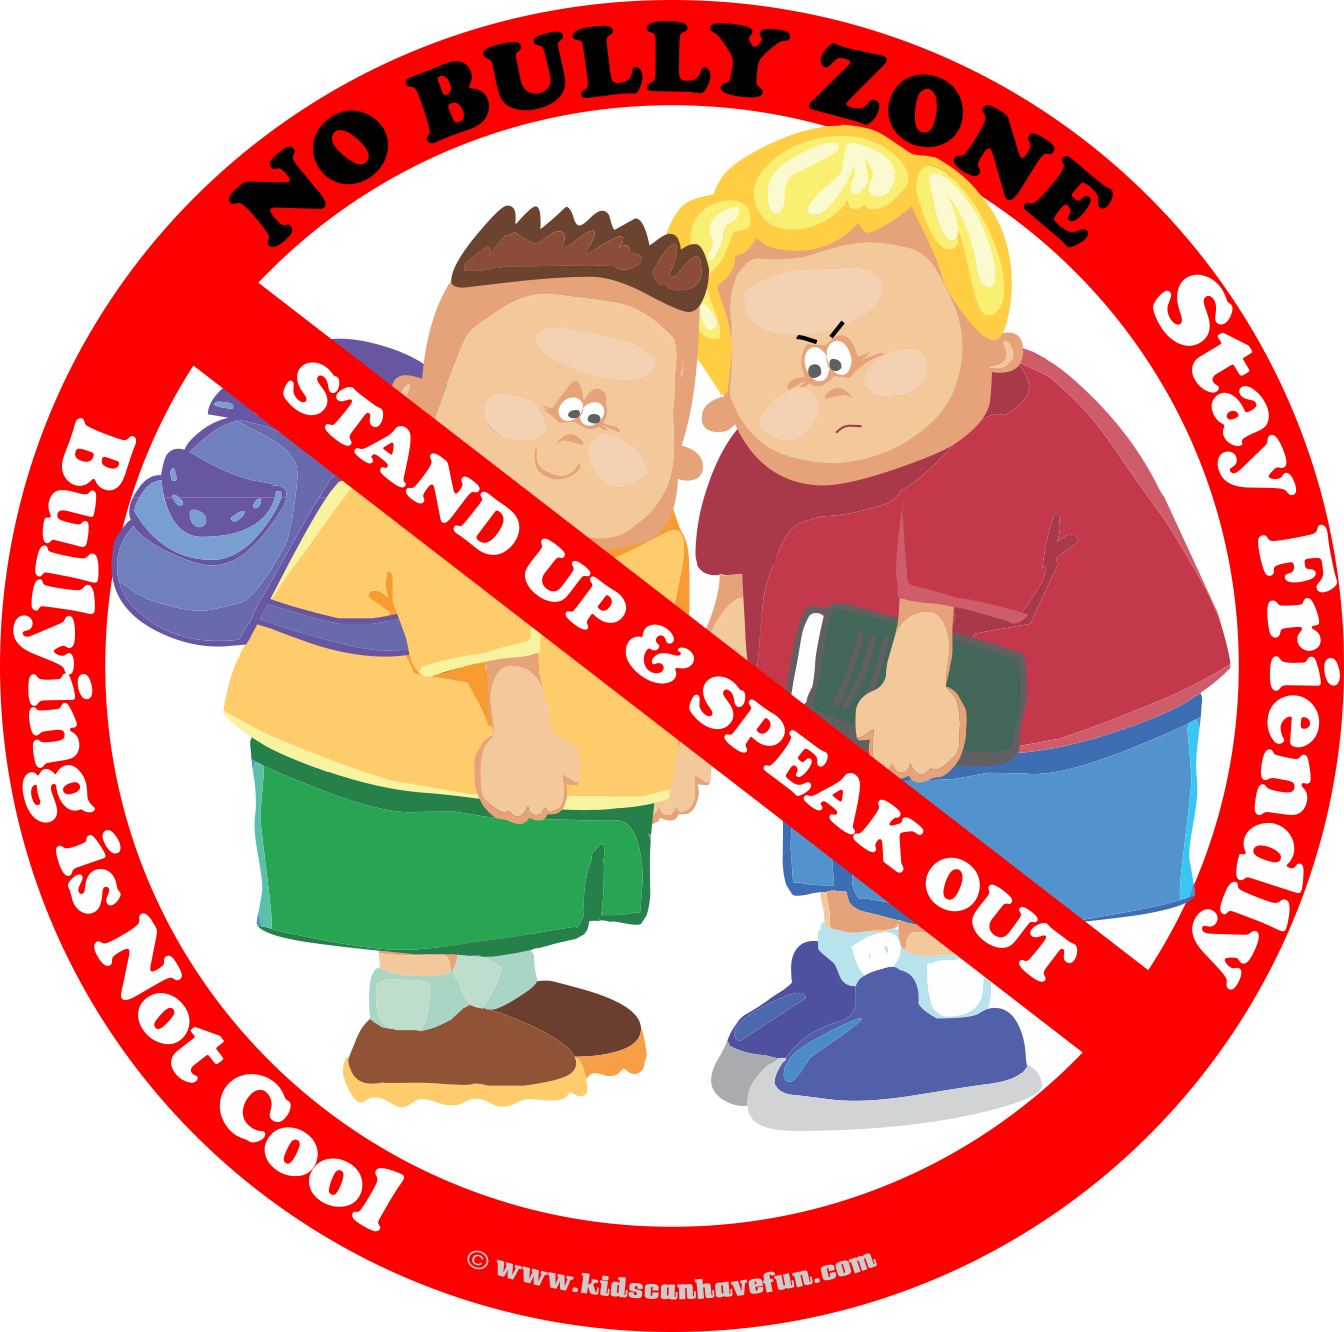 1000+ images about No bullying zone